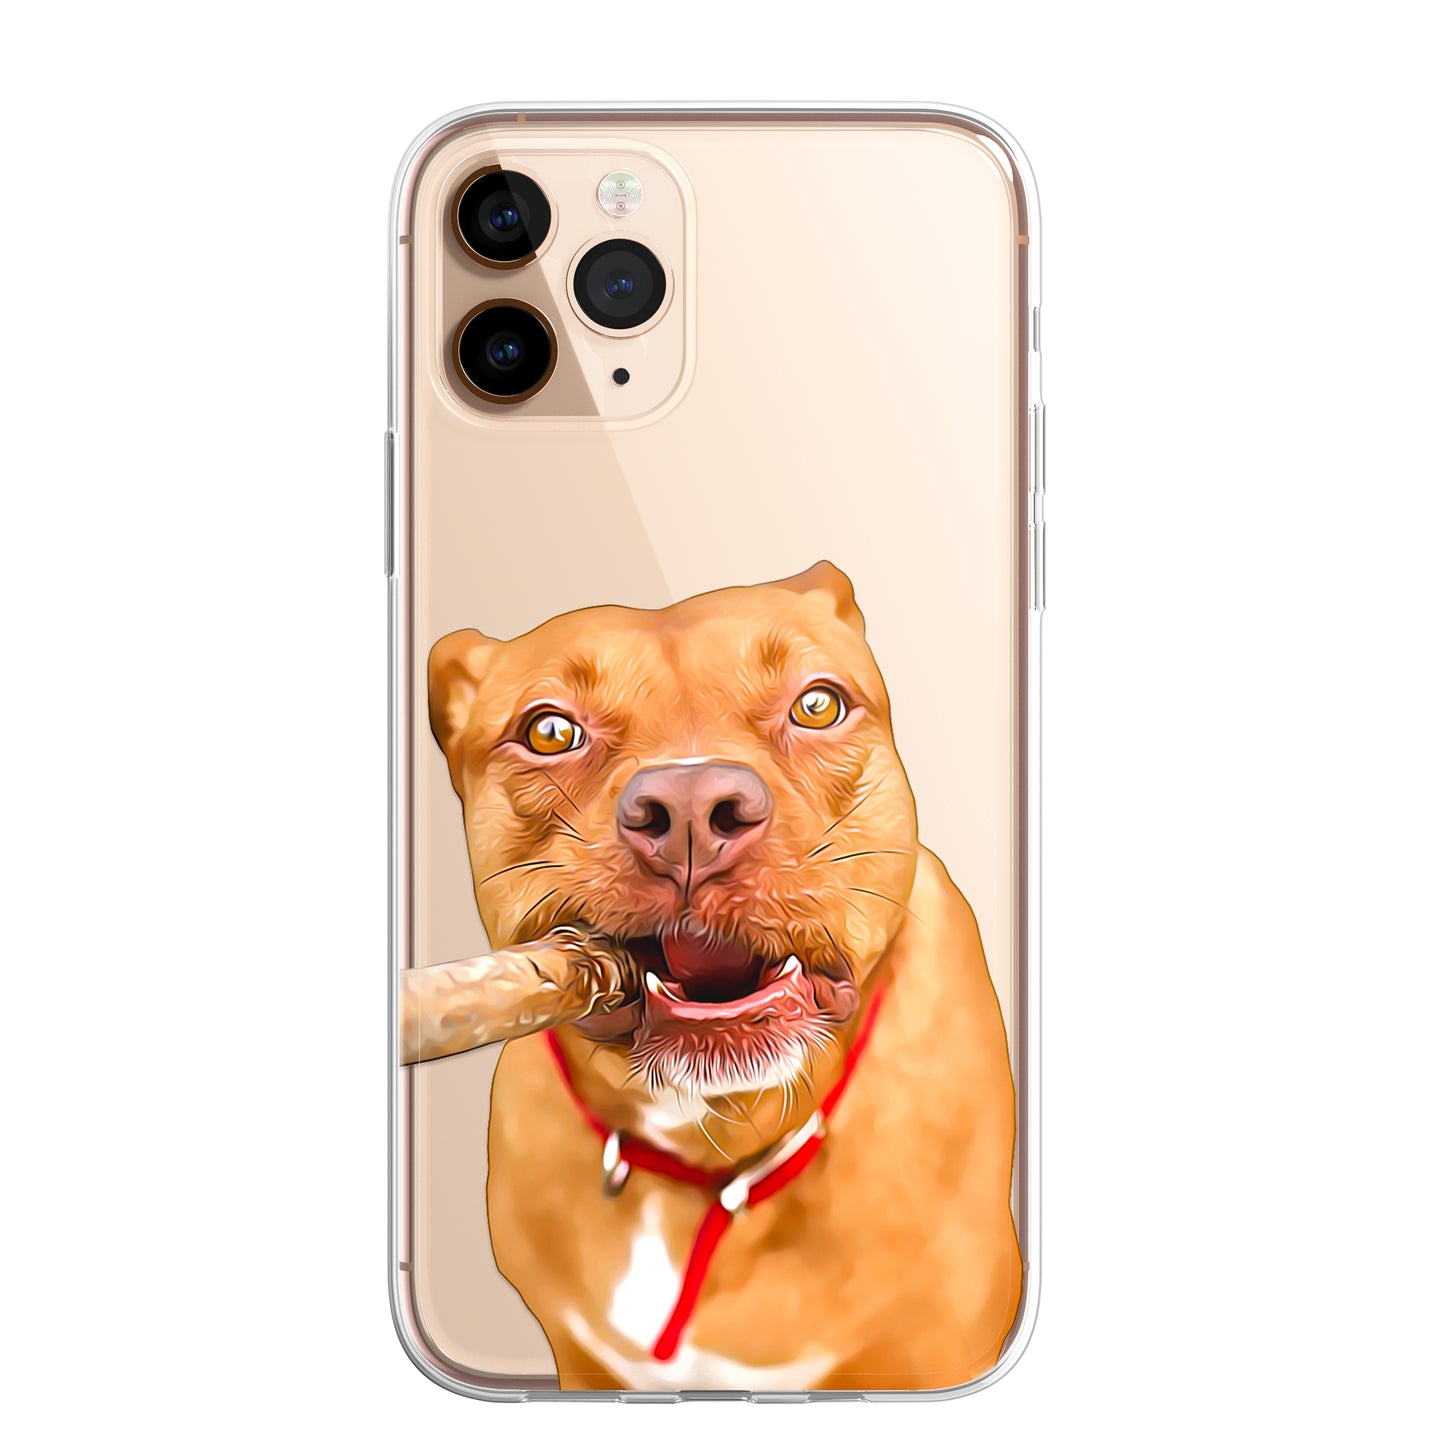 Staffy Staffordshire Terrier Pet Phone Case Brush CLEAR Phone Cover for iPhone